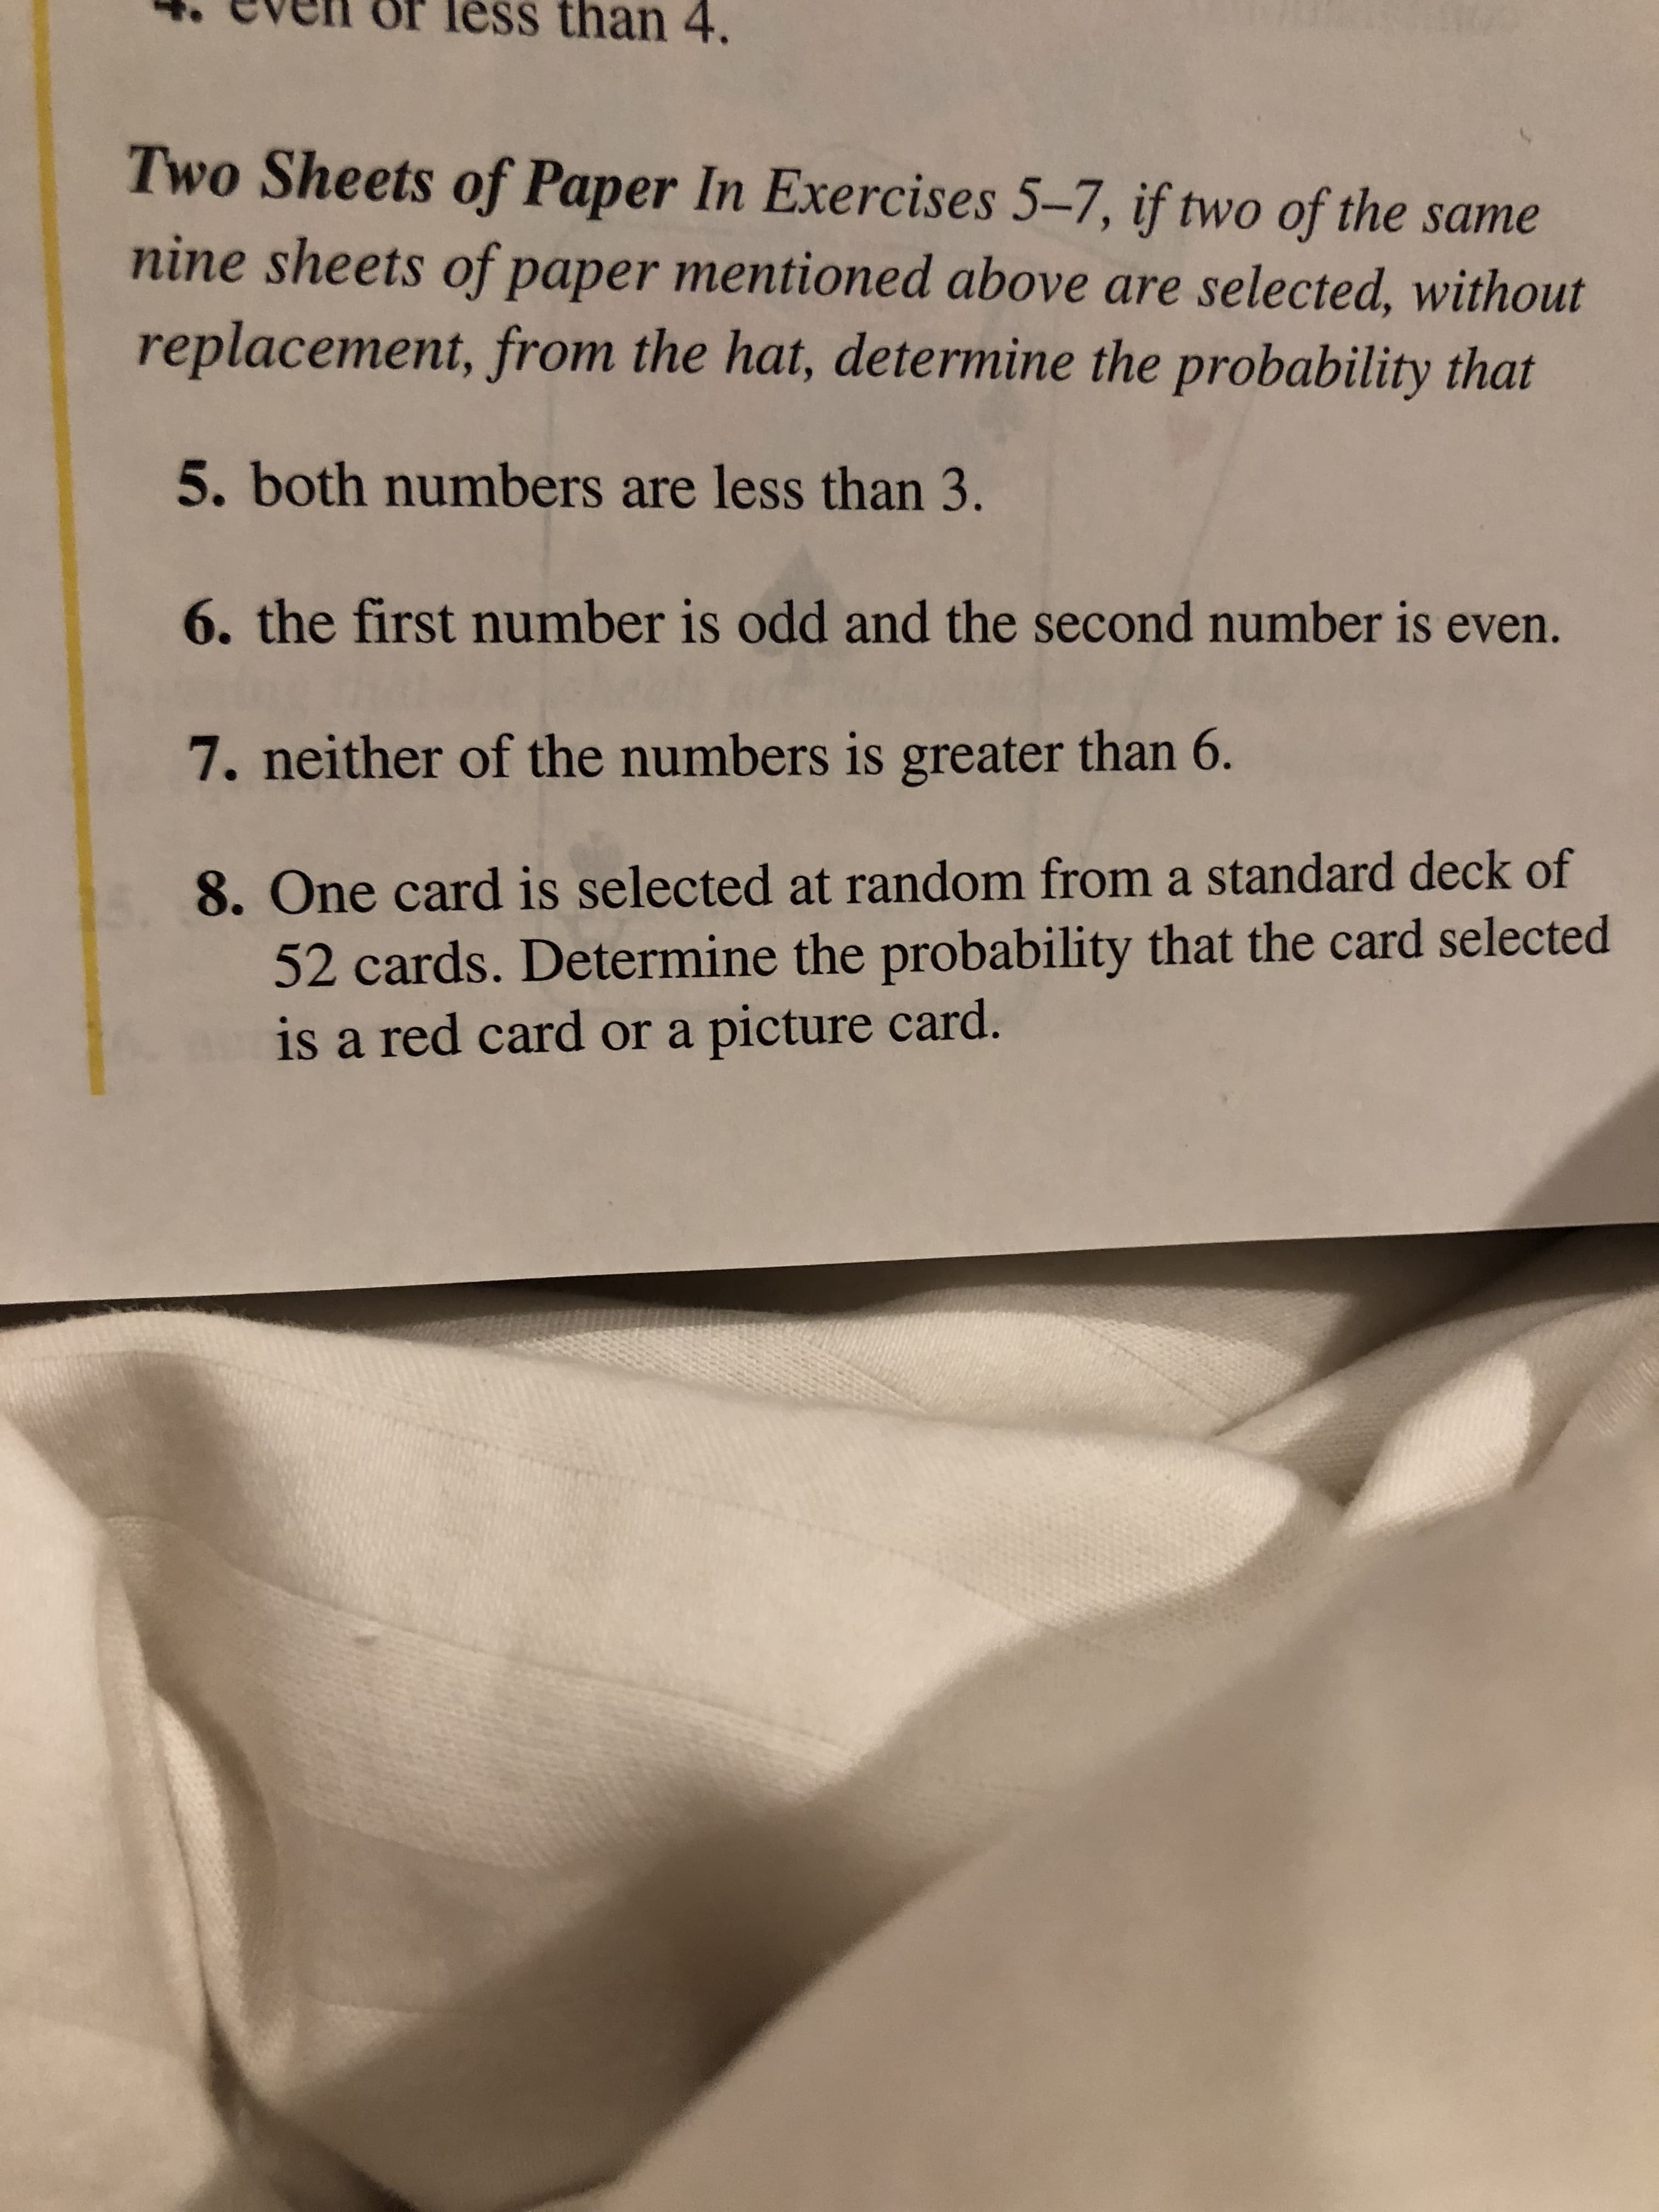 than 4.
Two Sheets of Paper In Exercises 5-7, if two of the same
nine sheets of paper mentioned above are selected, without
replacement, from the hat, determine the probability that
5. both numbers are less than 3.
6. the first number is odd and the second number is even.
7. neither of the numbers is greater than 6.
8. One card is selected at random from a standard deck of
52 cards. Determine the probability that the card selected
is a red card or a picture card.
